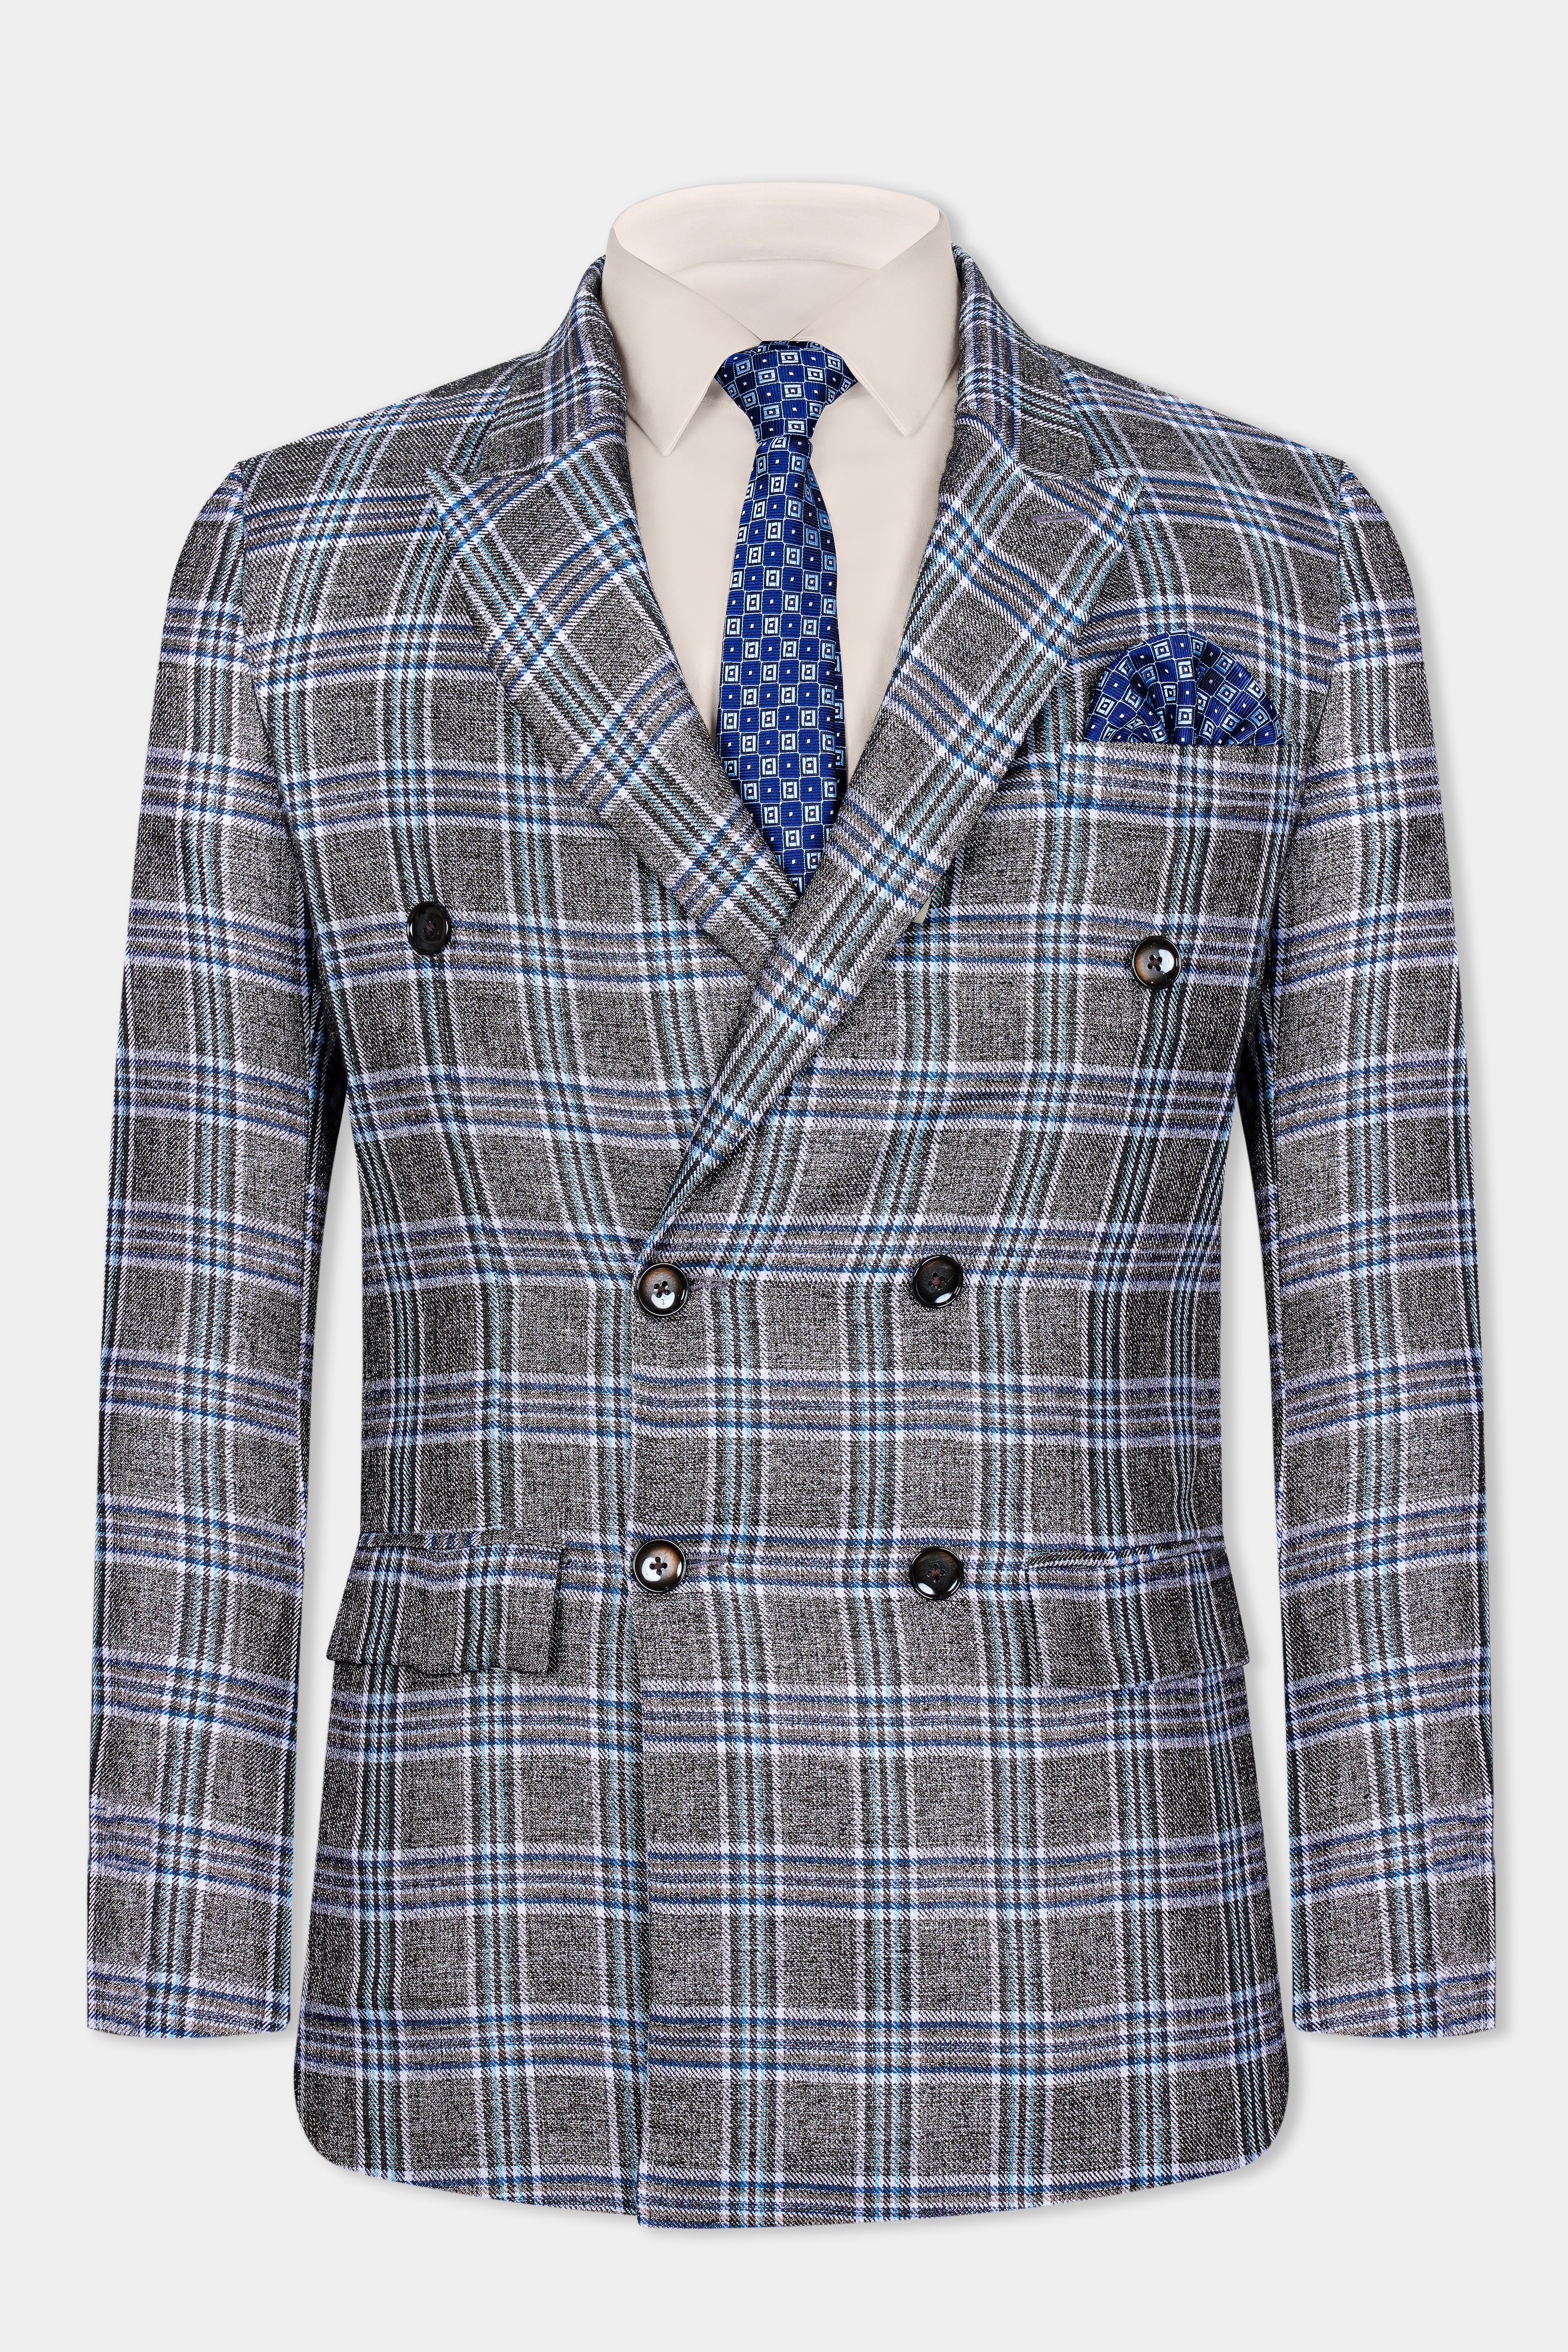 Ironside Gray and Cloud Burst Blue Plaid Wool Rich Double Breasted Suit ST3073-DB-36, ST3073-DB-38, ST3073-DB-40, ST3073-DB-42, ST3073-DB-44, ST3073-DB-46, ST3073-DB-48, ST3073-DB-50, ST3073-DB-52, ST3073-DB-54, ST3073-DB-56, ST3073-DB-58, ST3073-DB-60